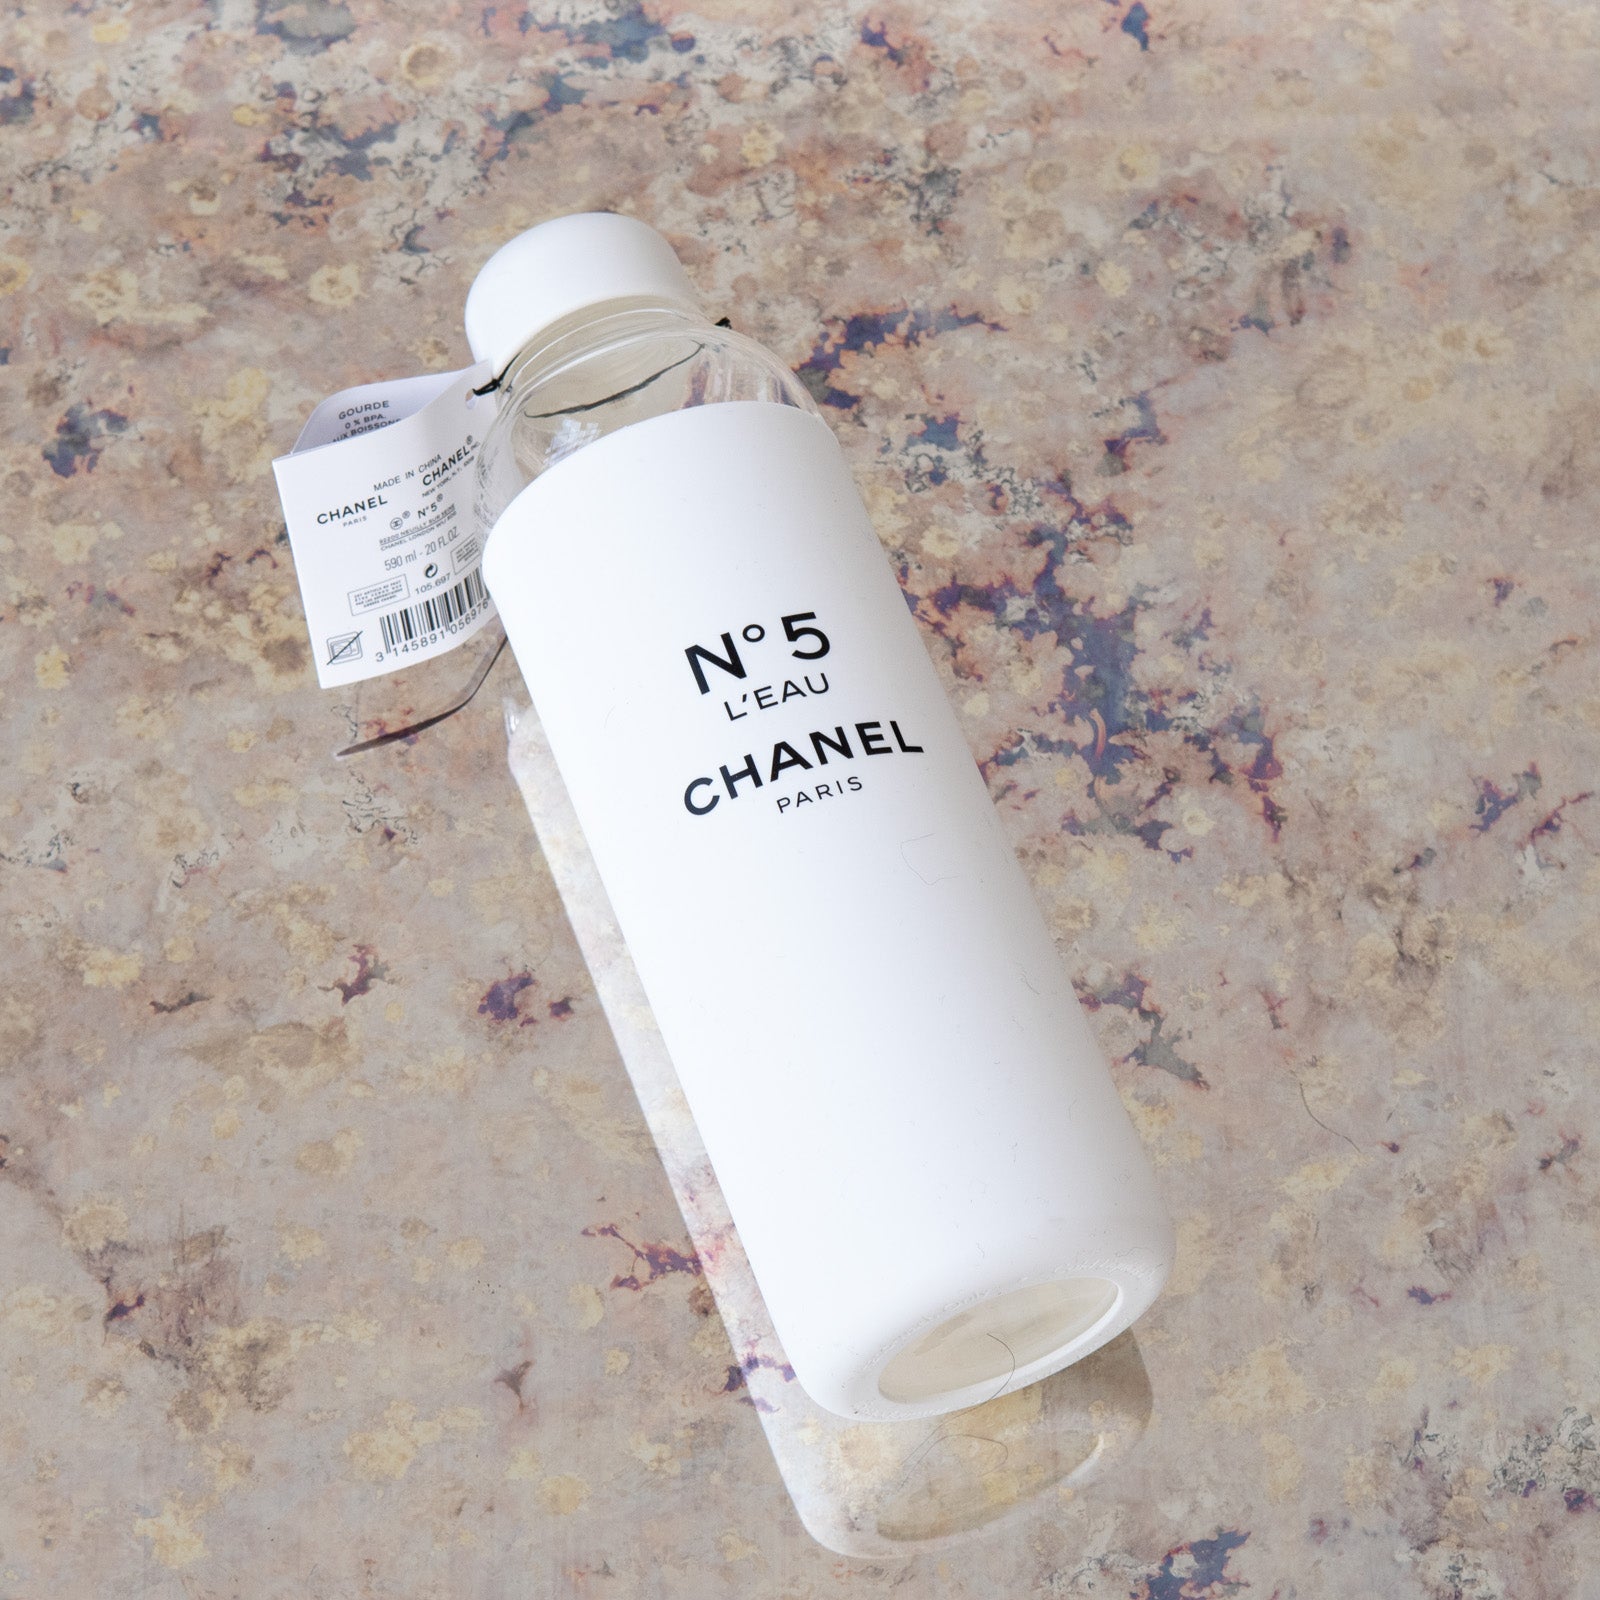 Chanel Limited Edition Water Bottle - Image 4 of 4